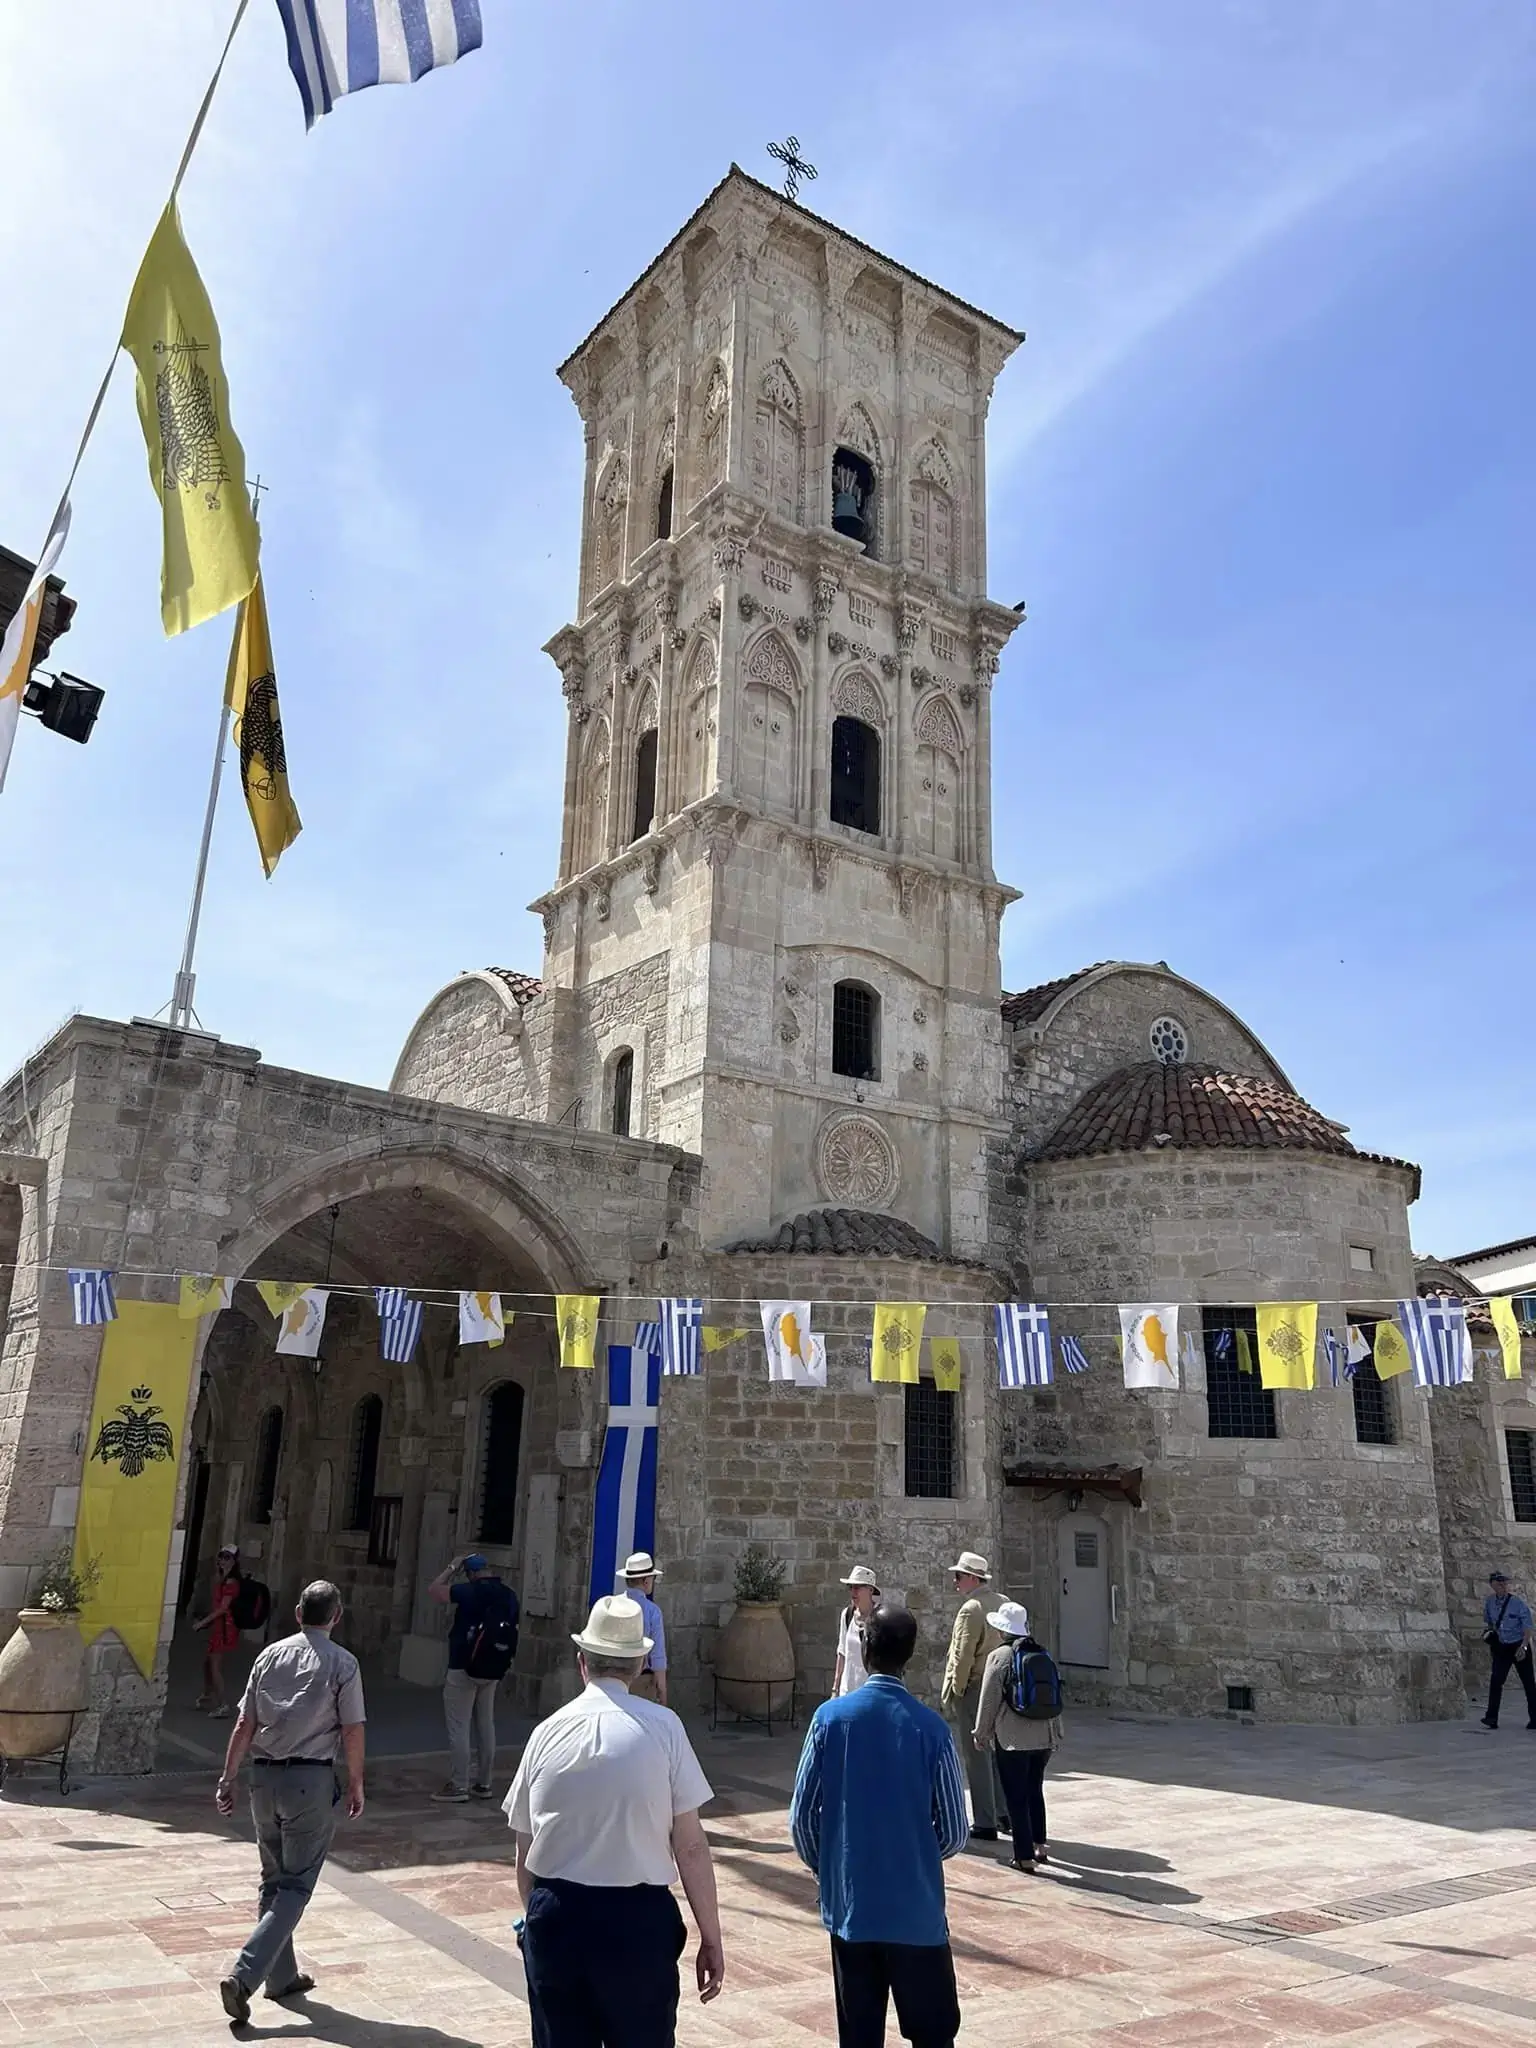 The ARCIC III members visited the Church of St Lazarus in Larnaca, Cyprus. Built in the late-9th century and dedicated to Lazarus of Bethany, it belongs to the Church of Cyprus, an autocephalous Greek Orthodox Church